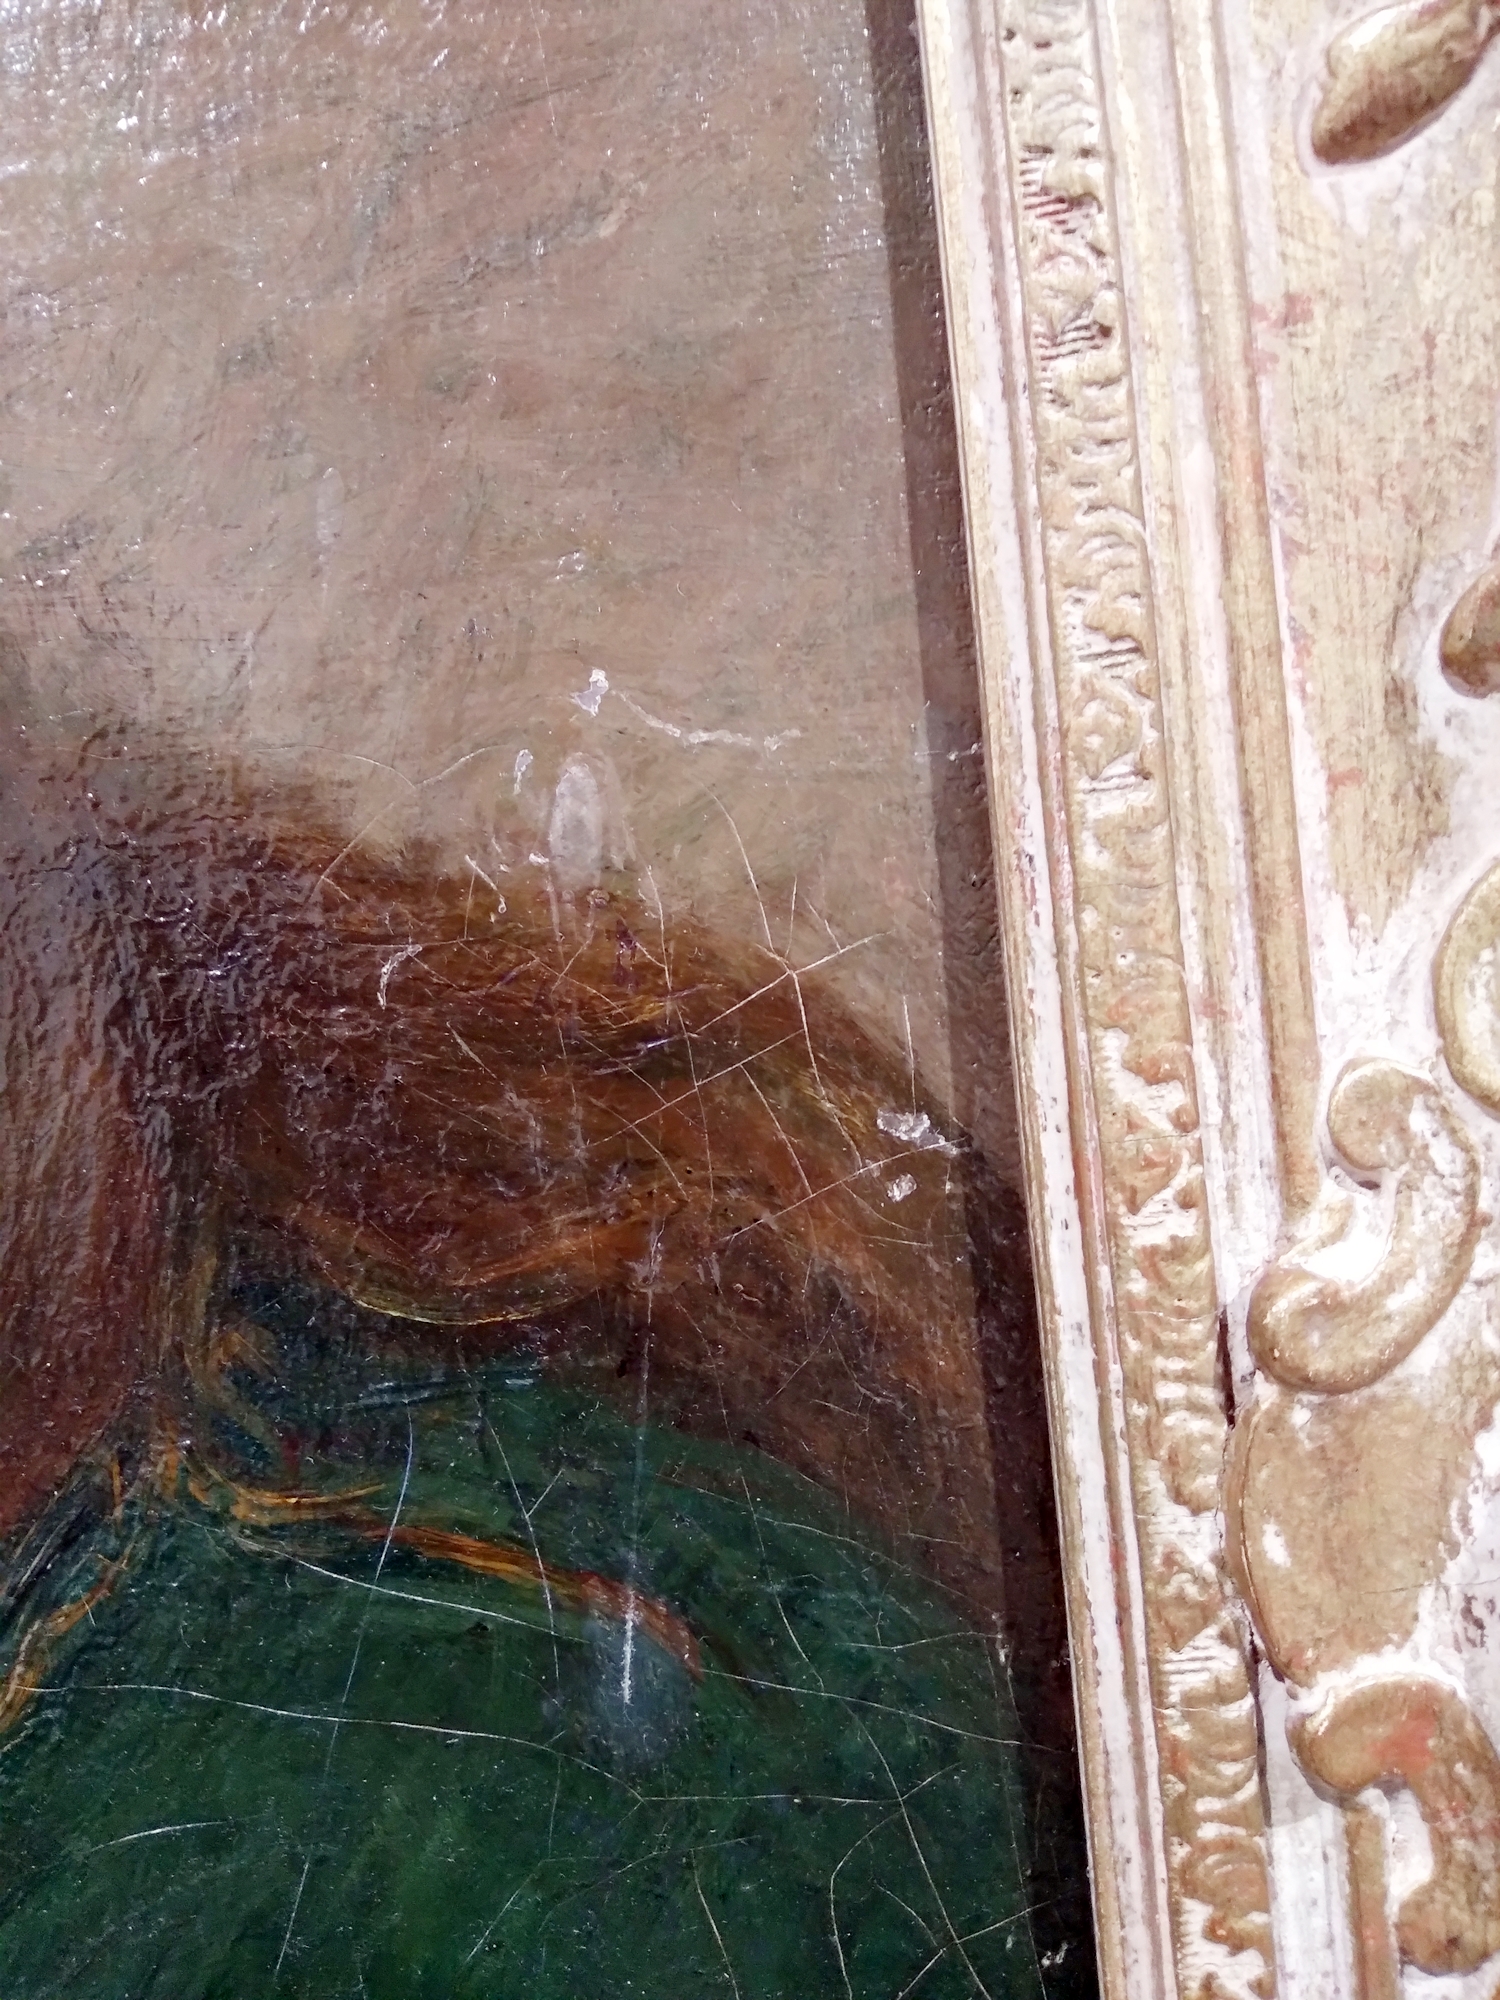 Late 19th century British School Oil on canvas Portrait of a young woman with windswept red hair - Image 7 of 12